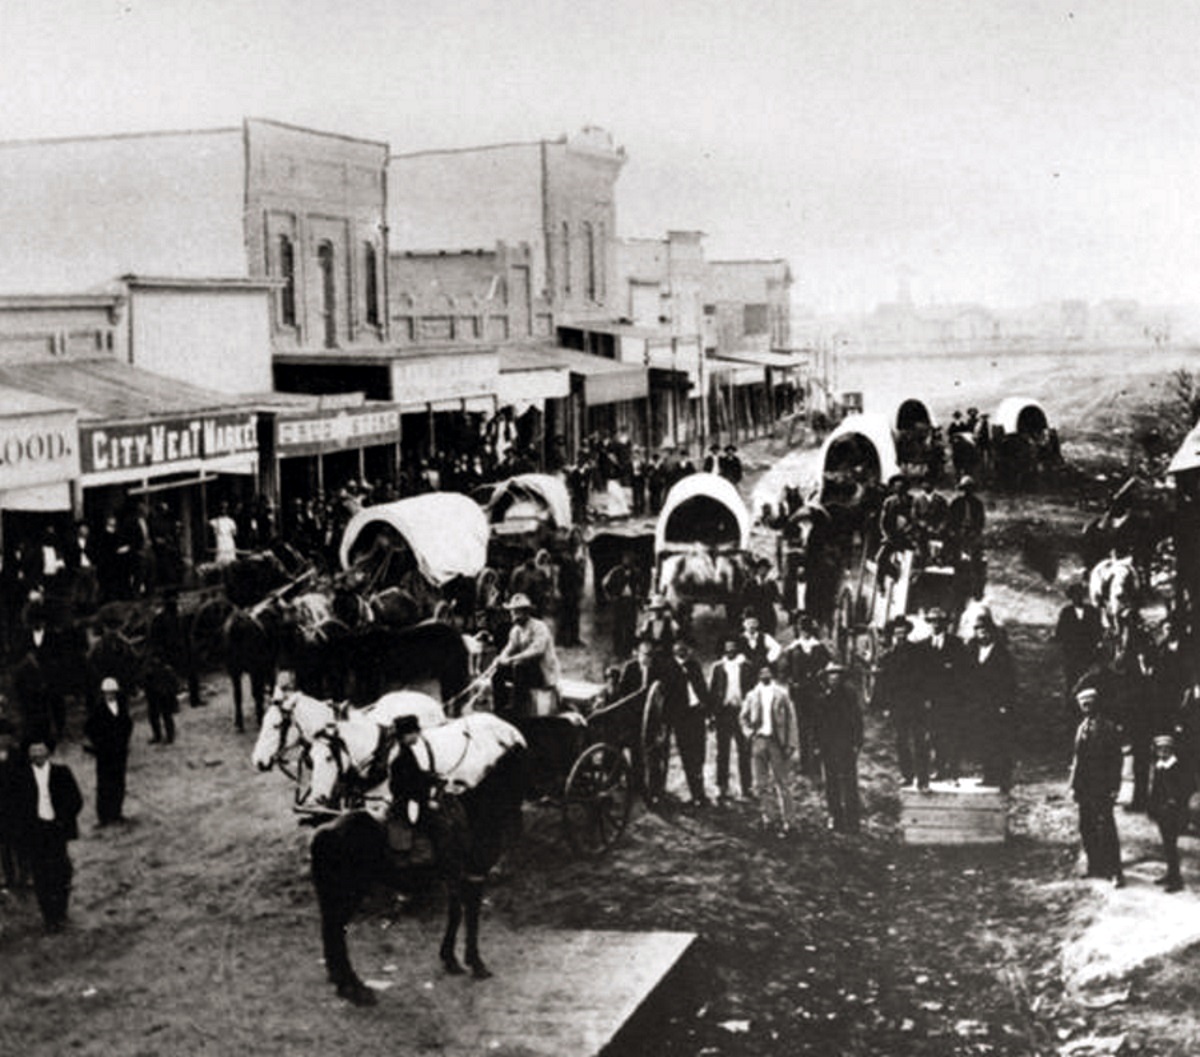 Downtown Midland Texas in 1890